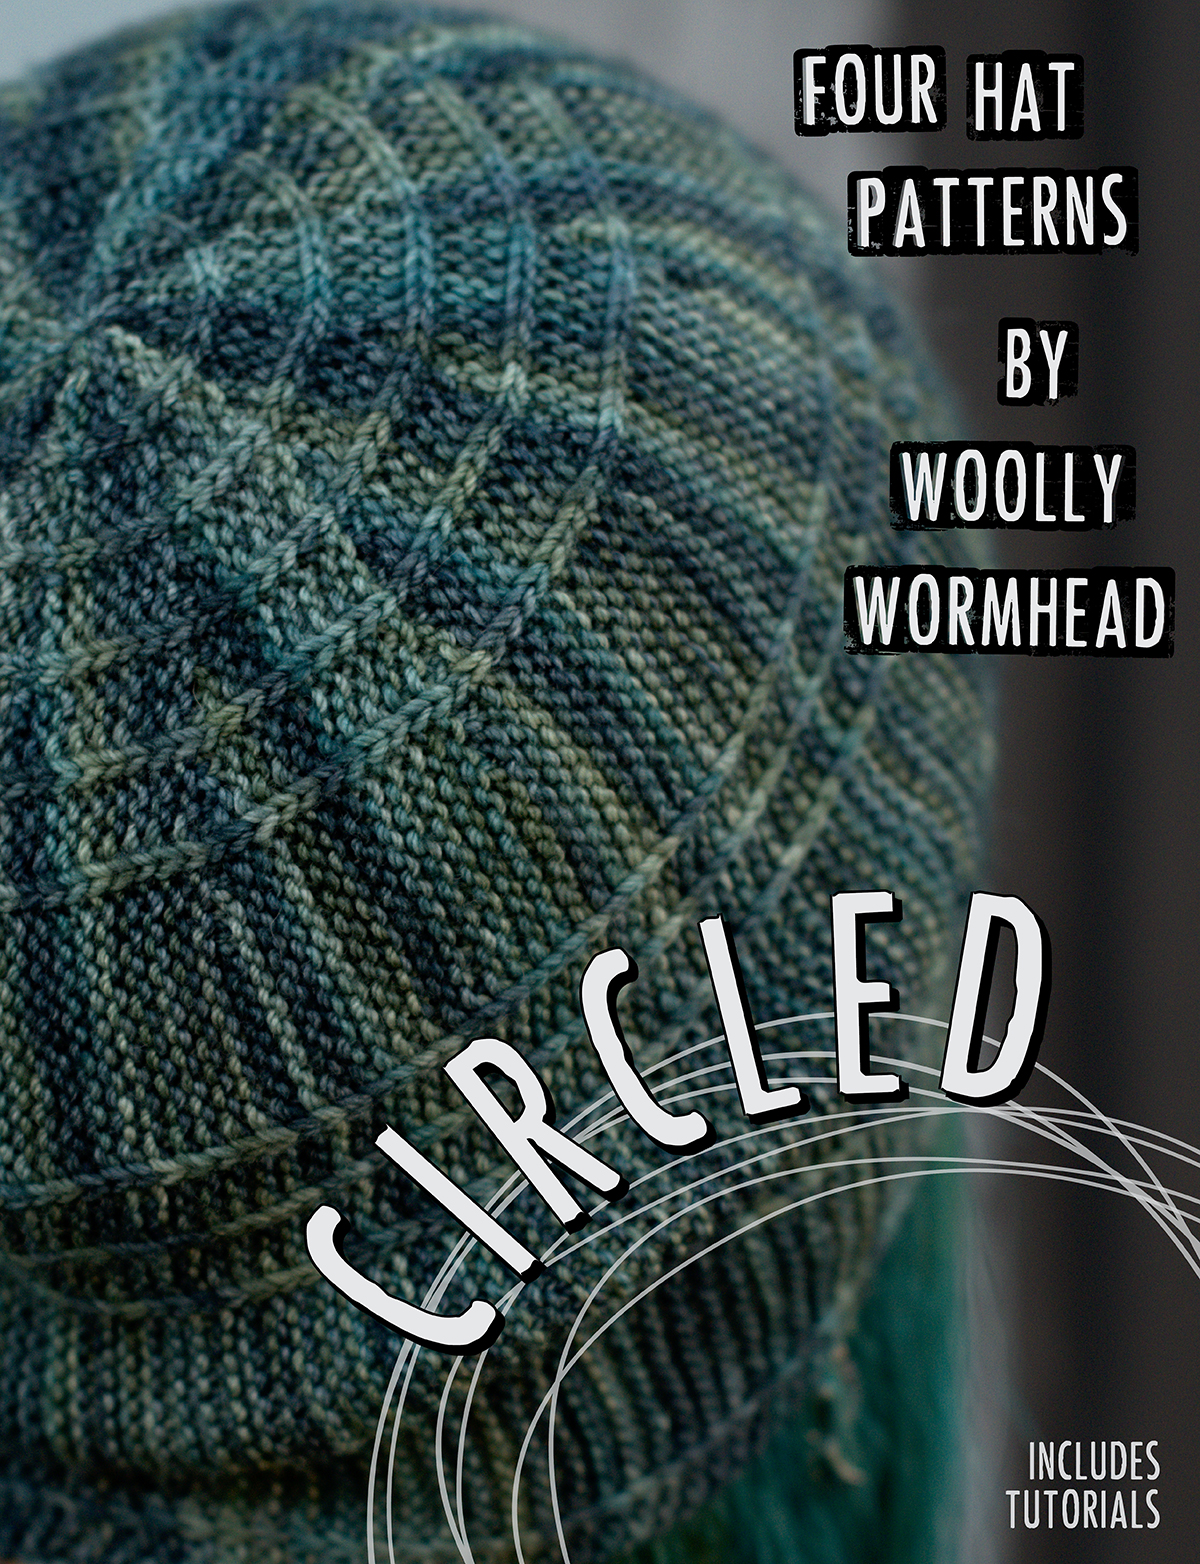 Circled collection of 4 hand knitted Hat designs plus technique manual